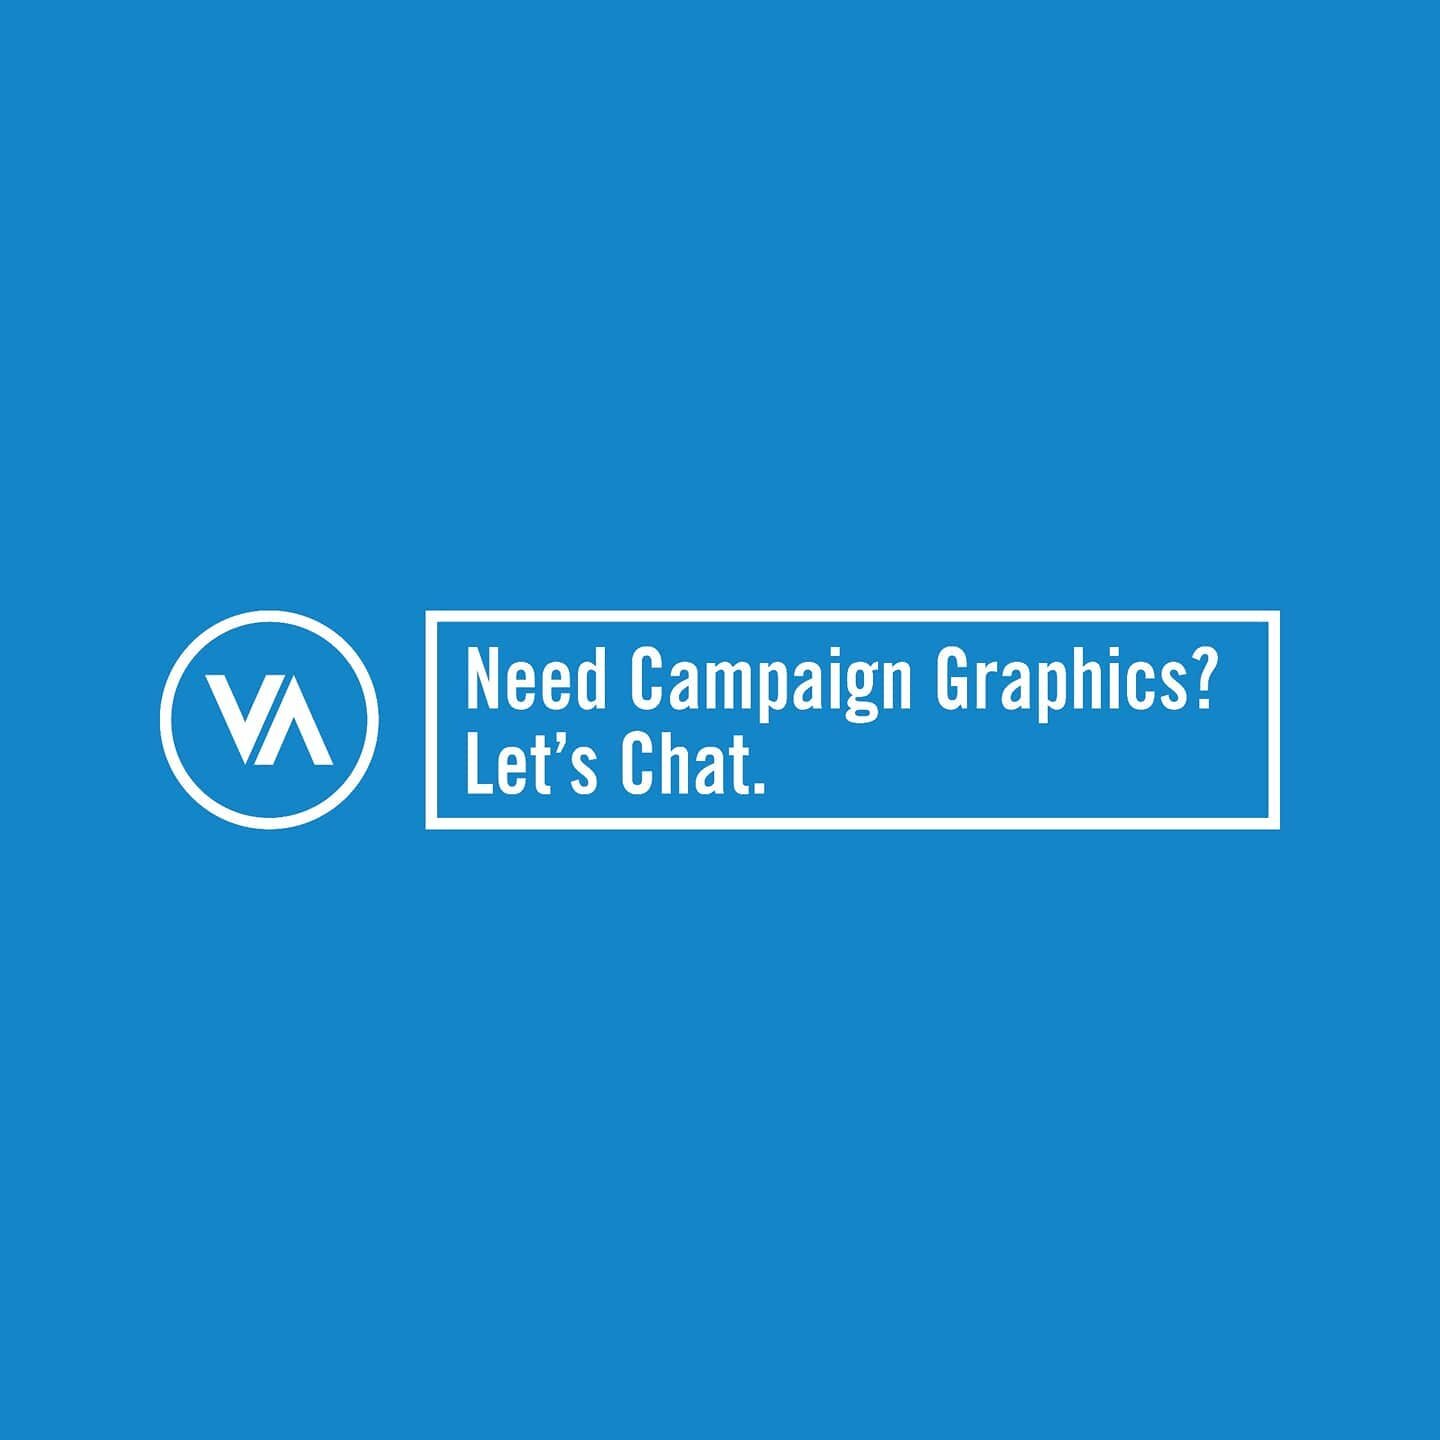 Are you working on an election campaign? Do you need signage or brochures designed? 
DM us for products and rates. #bcpoli